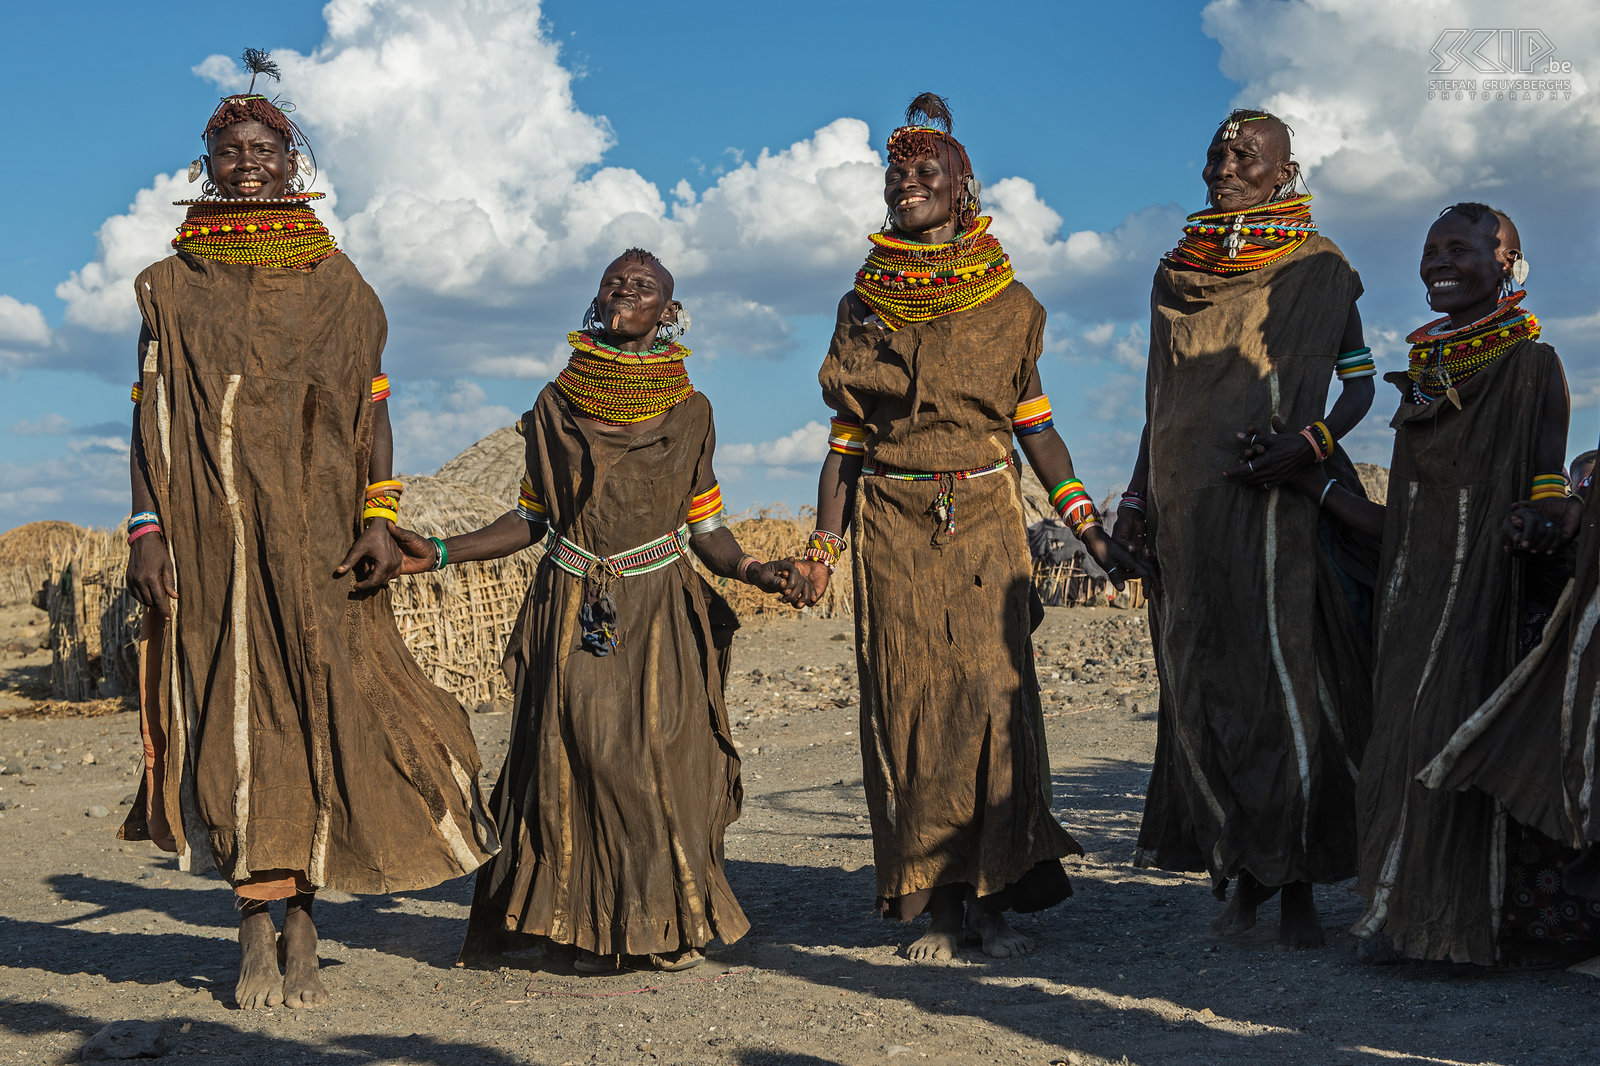 Lake Turkana - Dancing Turkana women Some Turkana women put on their cloth made of goat or cow leather and they demonstrate some tribal dances. Stefan Cruysberghs